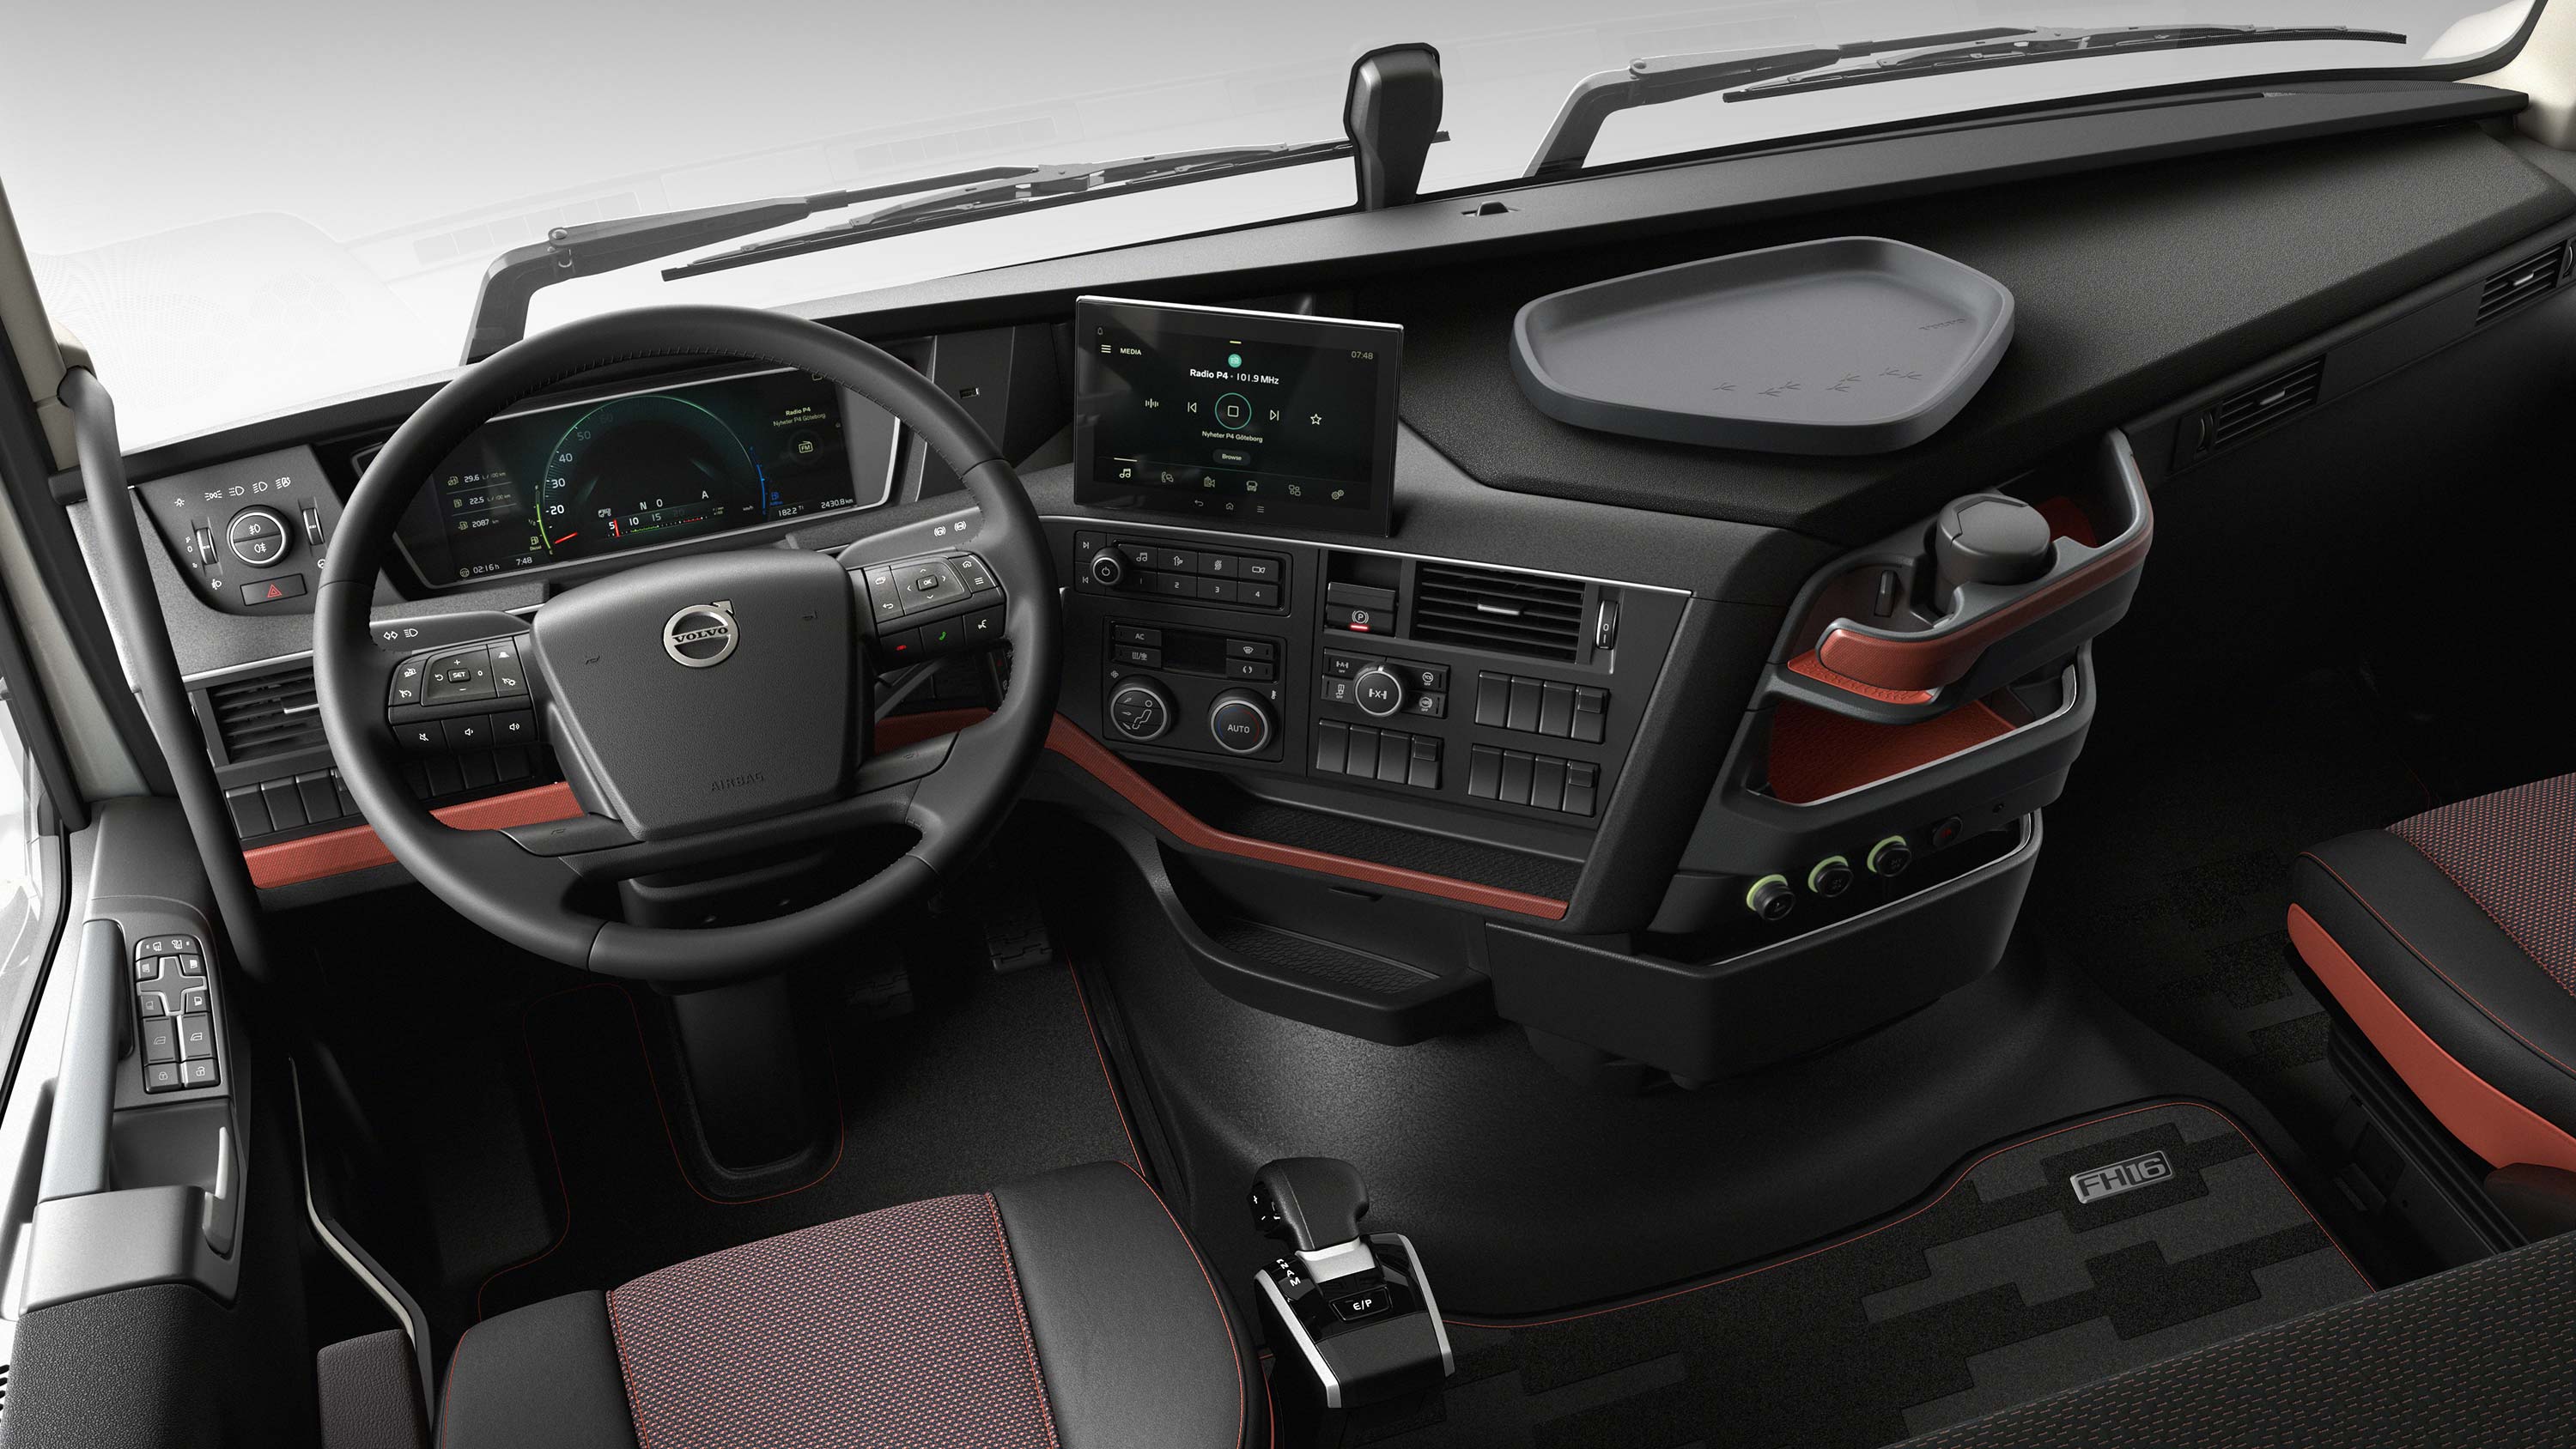 The Volvo FH16 driver interface puts the driver in control with ease.